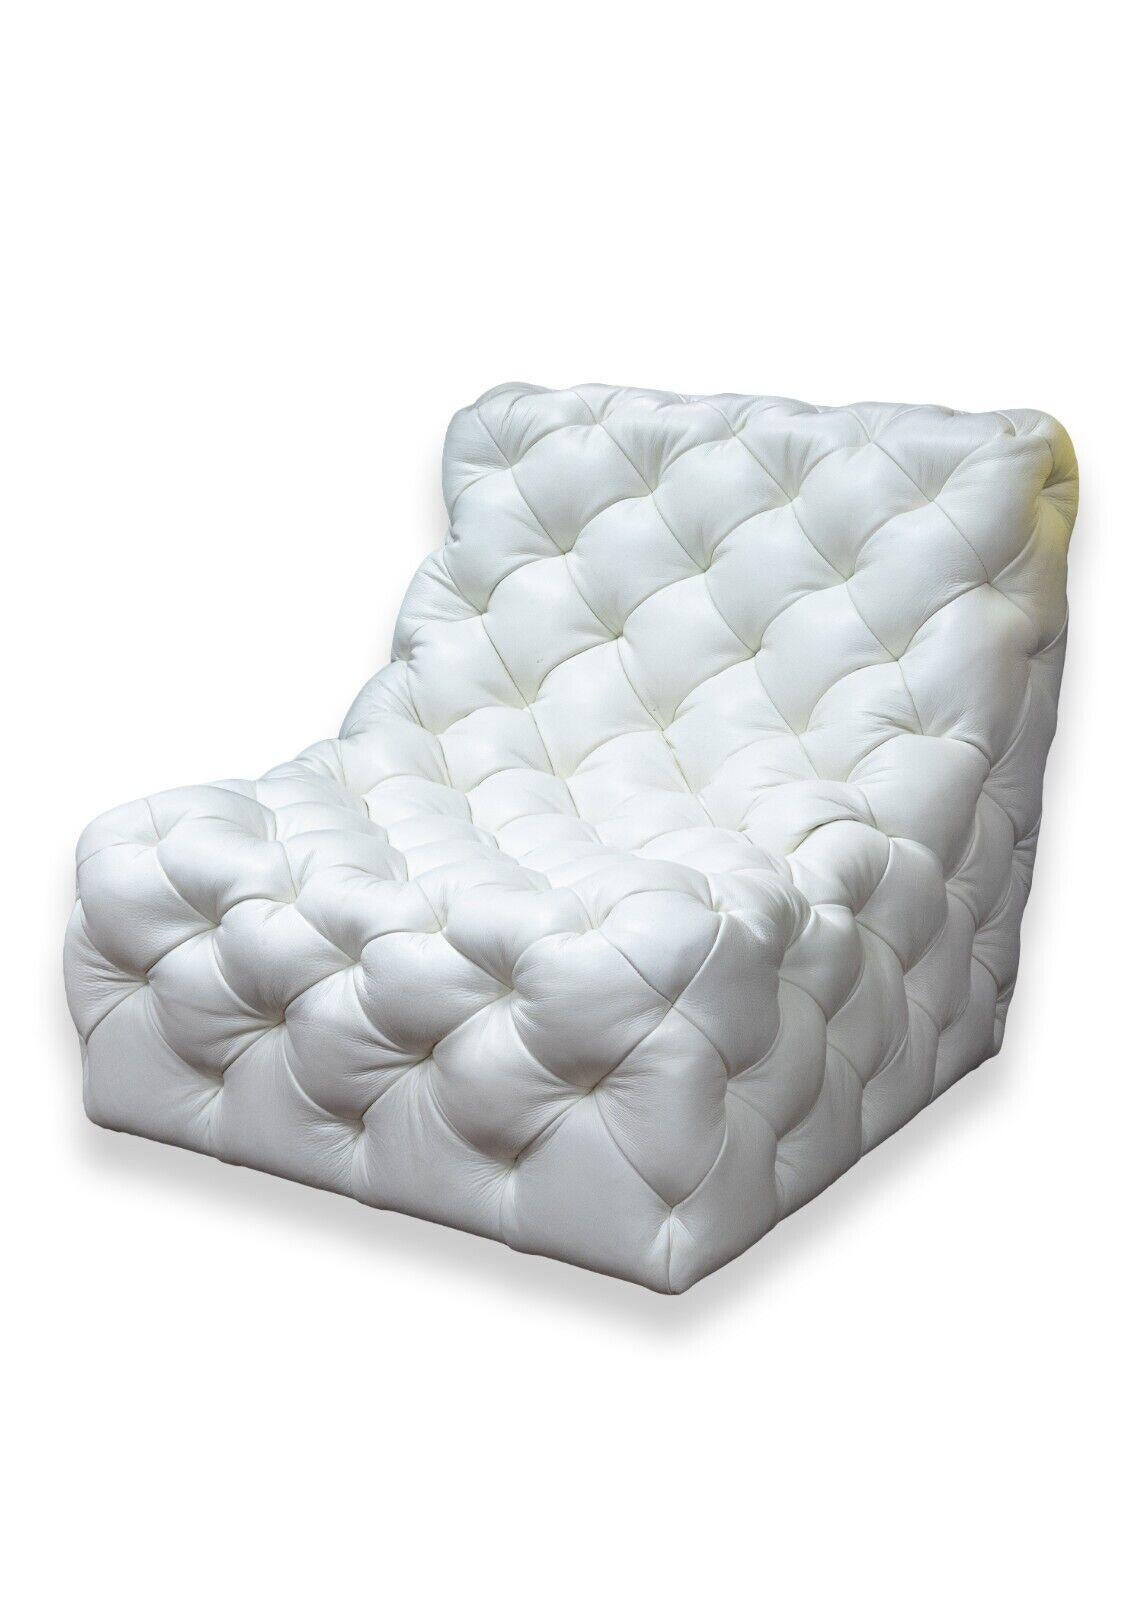 A contemporary modern Bernhardt Rigby white tufted leather swivel accent lounge chair. This is an extremely fun piece of furniture with a beautiful design. This chair features a gorgeous soft, white tufted leather from head to toe, and a smooth